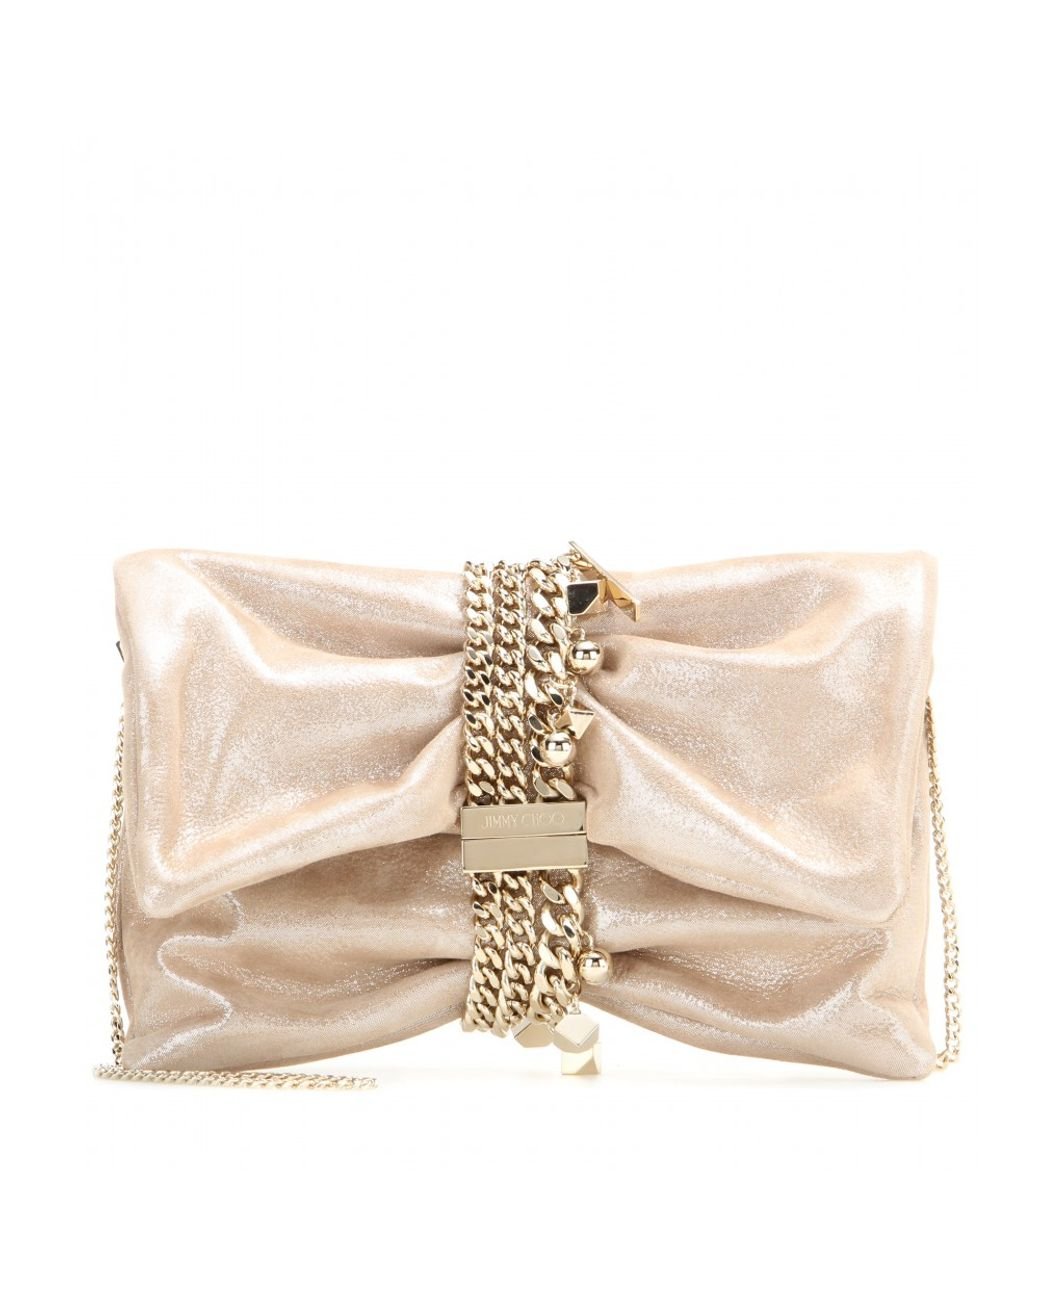 Jimmy Choo Chandra Embellished Suede Clutch in Natural | Lyst